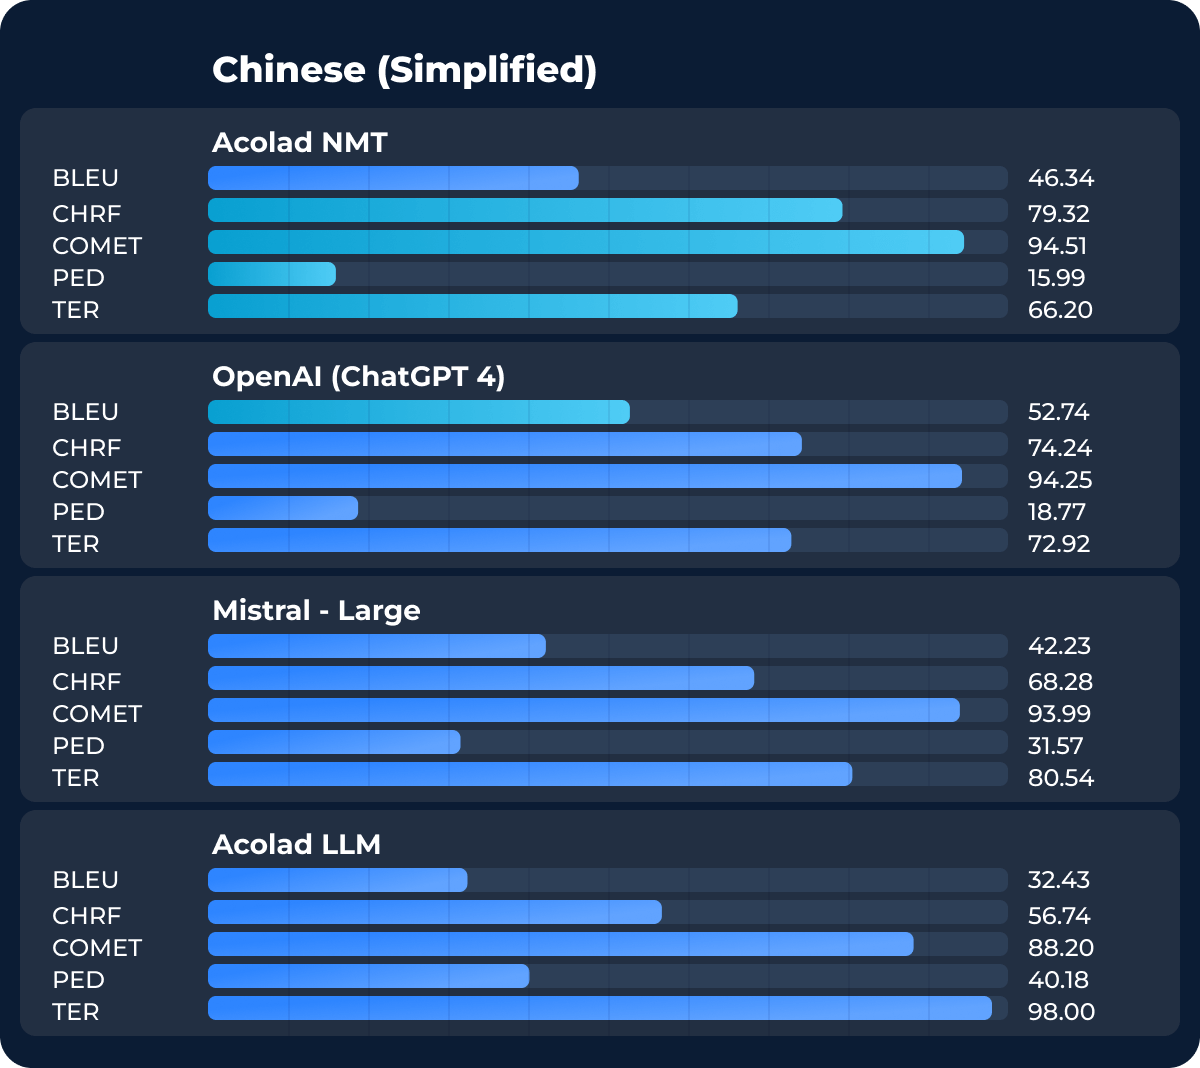 Chinese Simplified NMT vs LLM Translation Results